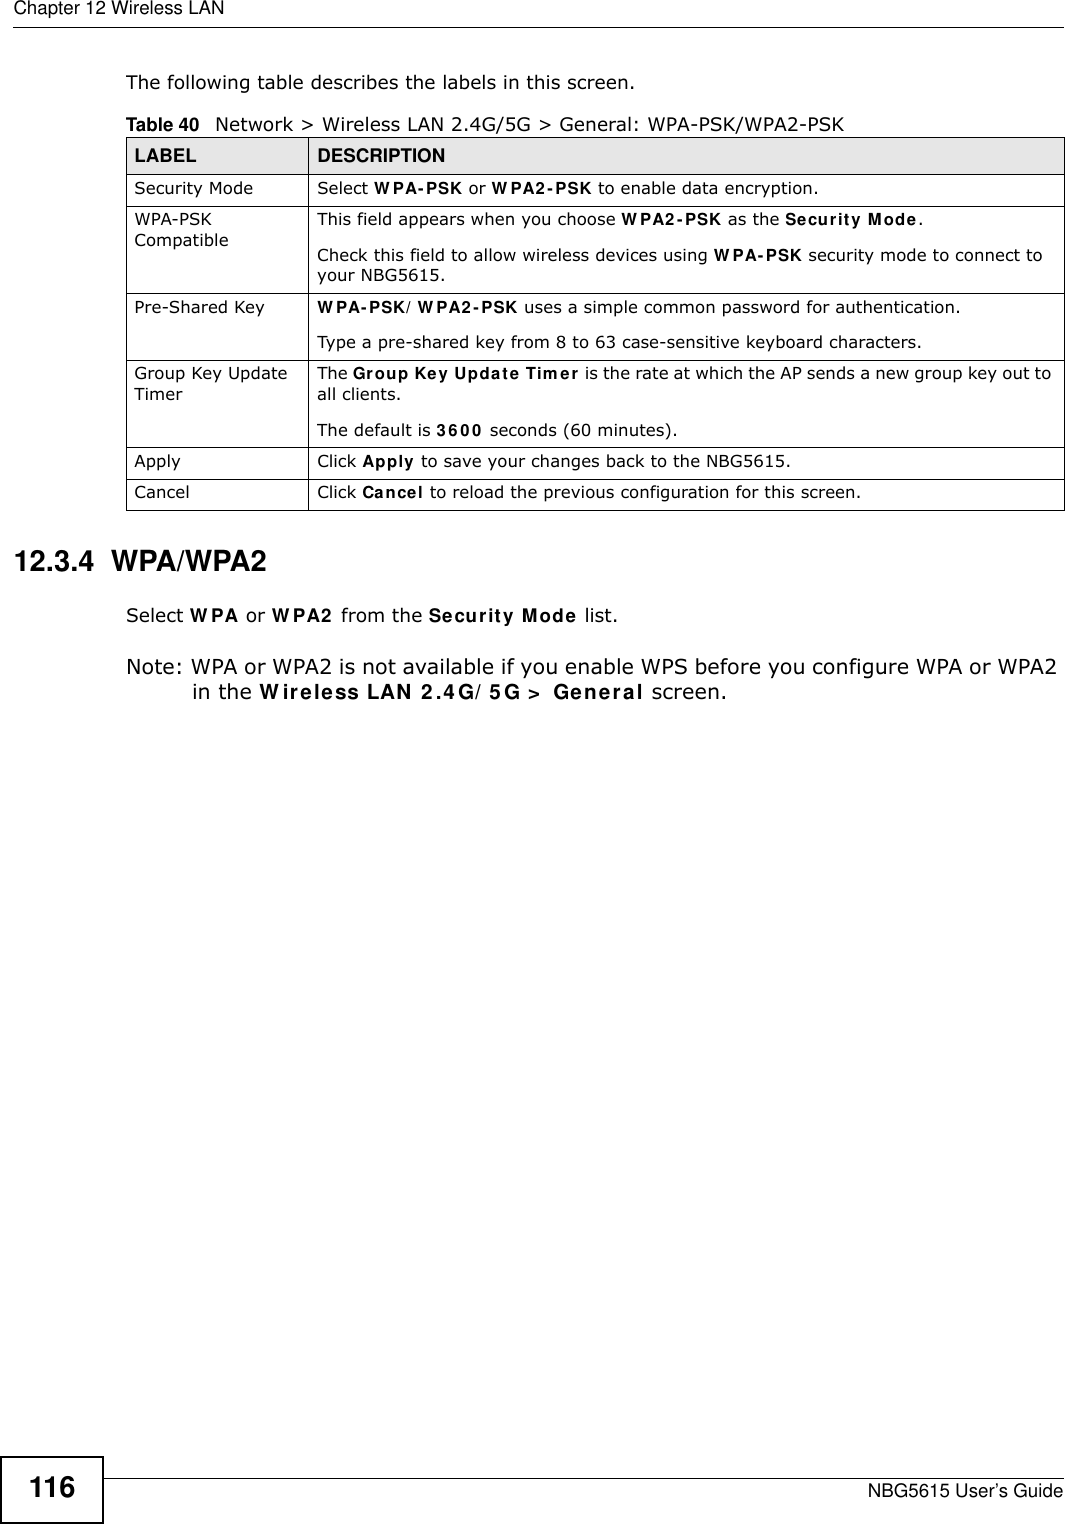 Chapter 12 Wireless LANNBG5615 User’s Guide116The following table describes the labels in this screen.12.3.4  WPA/WPA2Select W PA or W PA2  from the Security Mode list. Note: WPA or WPA2 is not available if you enable WPS before you configure WPA or WPA2 in the W ireless LAN 2 .4 G/ 5 G &gt;  General screen.Table 40   Network &gt; Wireless LAN 2.4G/5G &gt; General: WPA-PSK/WPA2-PSKLABEL DESCRIPTIONSecurity Mode Select W PA- PSK or W PA2- PSK to enable data encryption.WPA-PSK CompatibleThis field appears when you choose W PA2 -PSK as the Security Mode.Check this field to allow wireless devices using W PA- PSK security mode to connect to your NBG5615.Pre-Shared Key  W PA-PSK/ W PA2- PSK uses a simple common password for authentication.Type a pre-shared key from 8 to 63 case-sensitive keyboard characters.Group Key Update TimerThe Group Key Update Tim er is the rate at which the AP sends a new group key out to all clients. The default is 36 0 0 seconds (60 minutes).Apply Click Apply to save your changes back to the NBG5615.Cancel Click Cancel to reload the previous configuration for this screen.